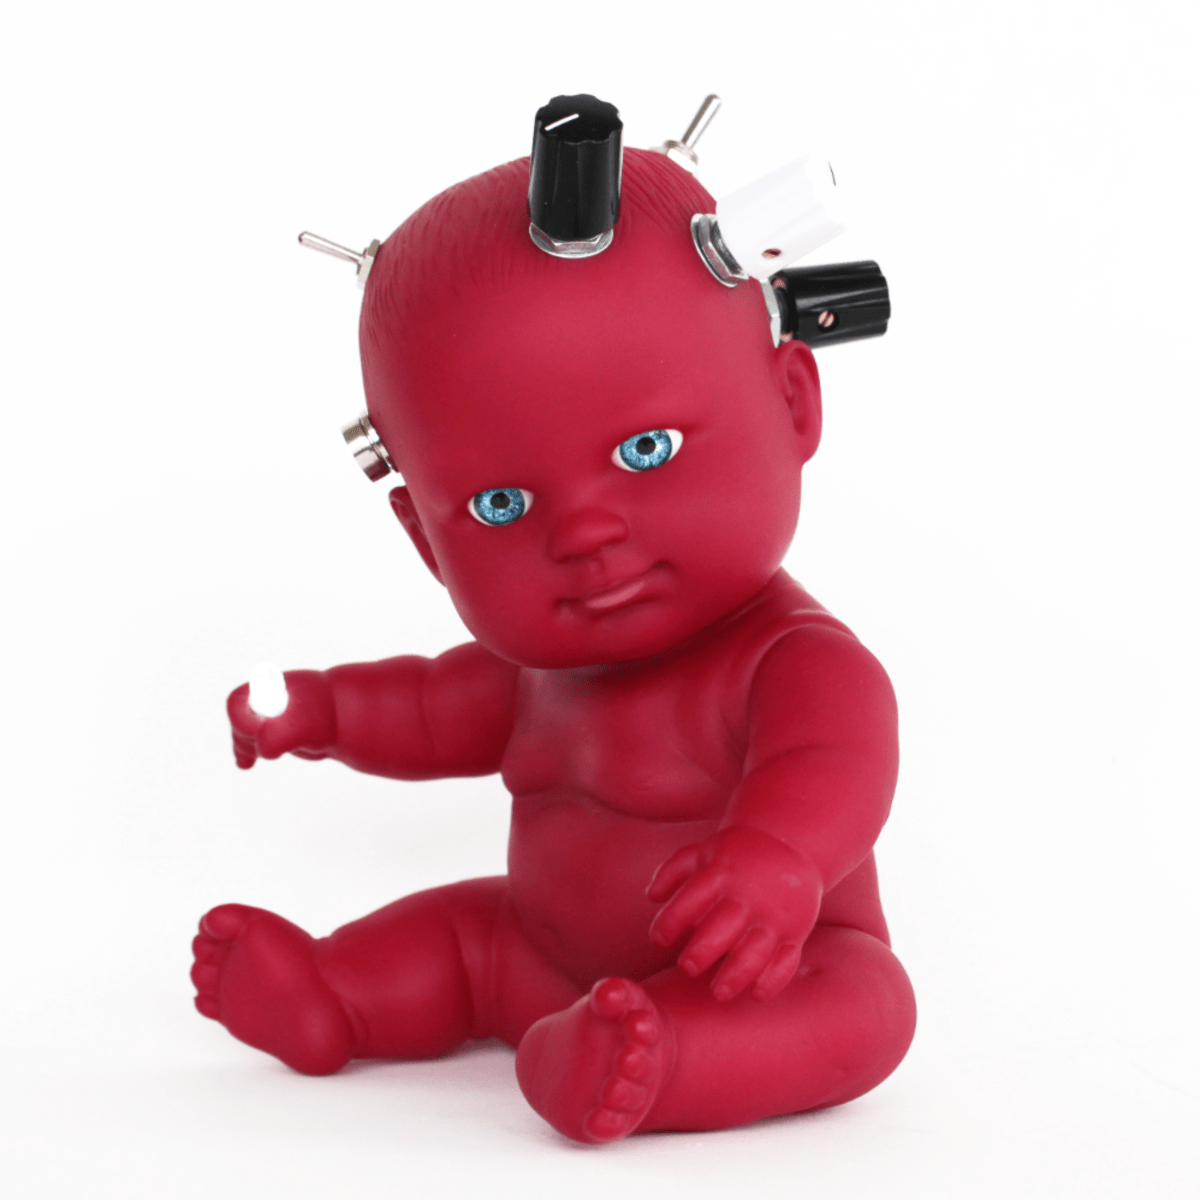 There's No Calming This Creepy, Light-Sensitive Baby Synthesizer